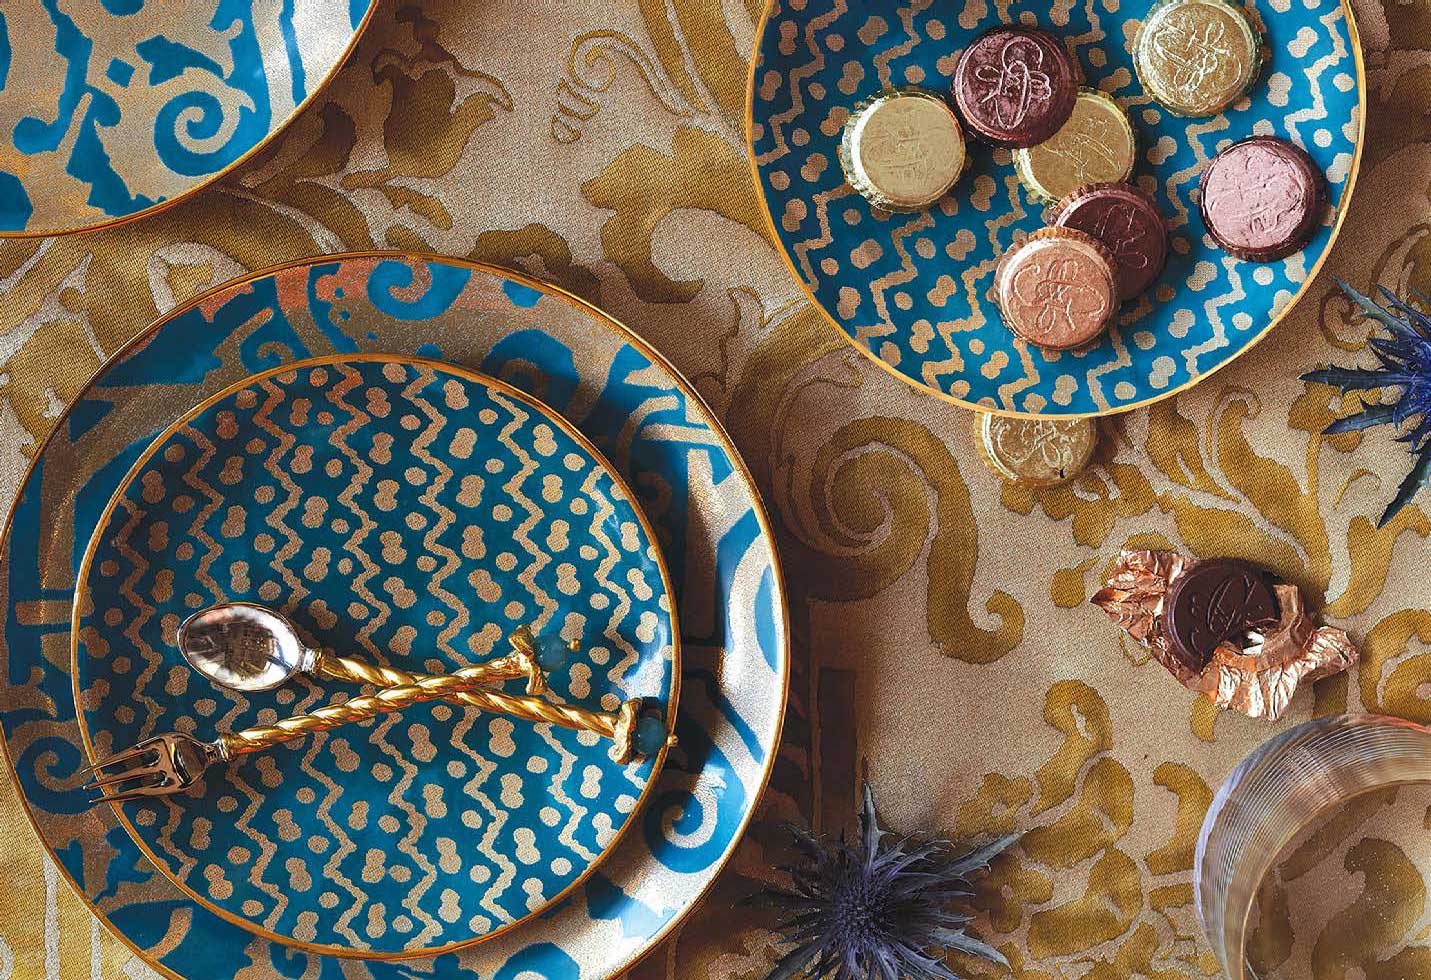 Fortuny tableware and diningware - dessert and canape plates, bowls, canisters, vases and platters